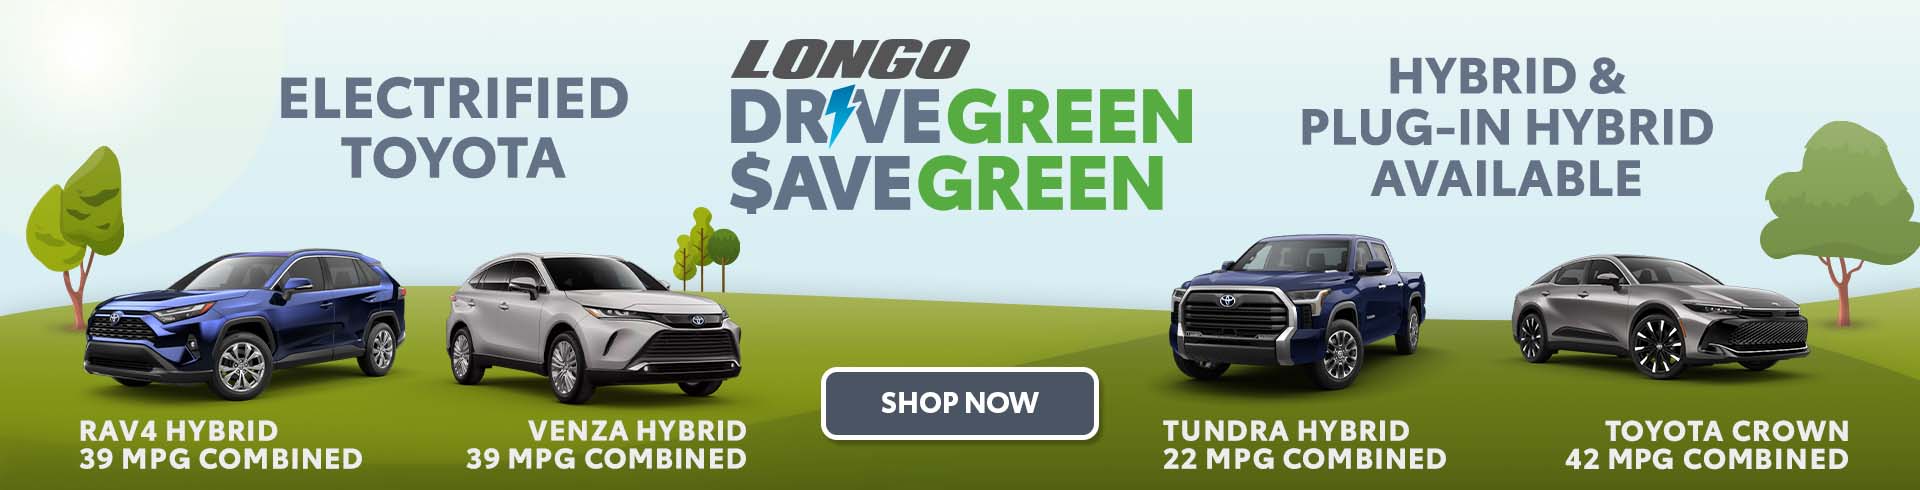 The Drive Green, Save Green Sales Event Is Going on Now